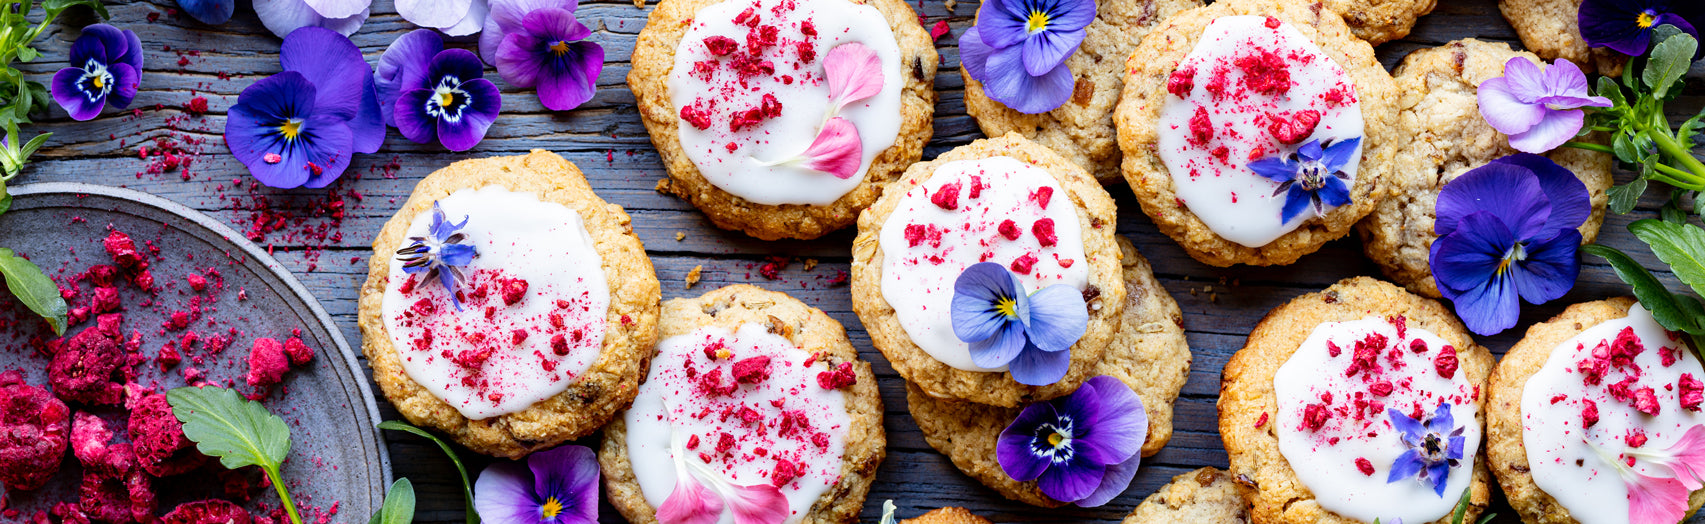 Beautiful array of herbal lactation cookies decorated with pink and purple edible flowers